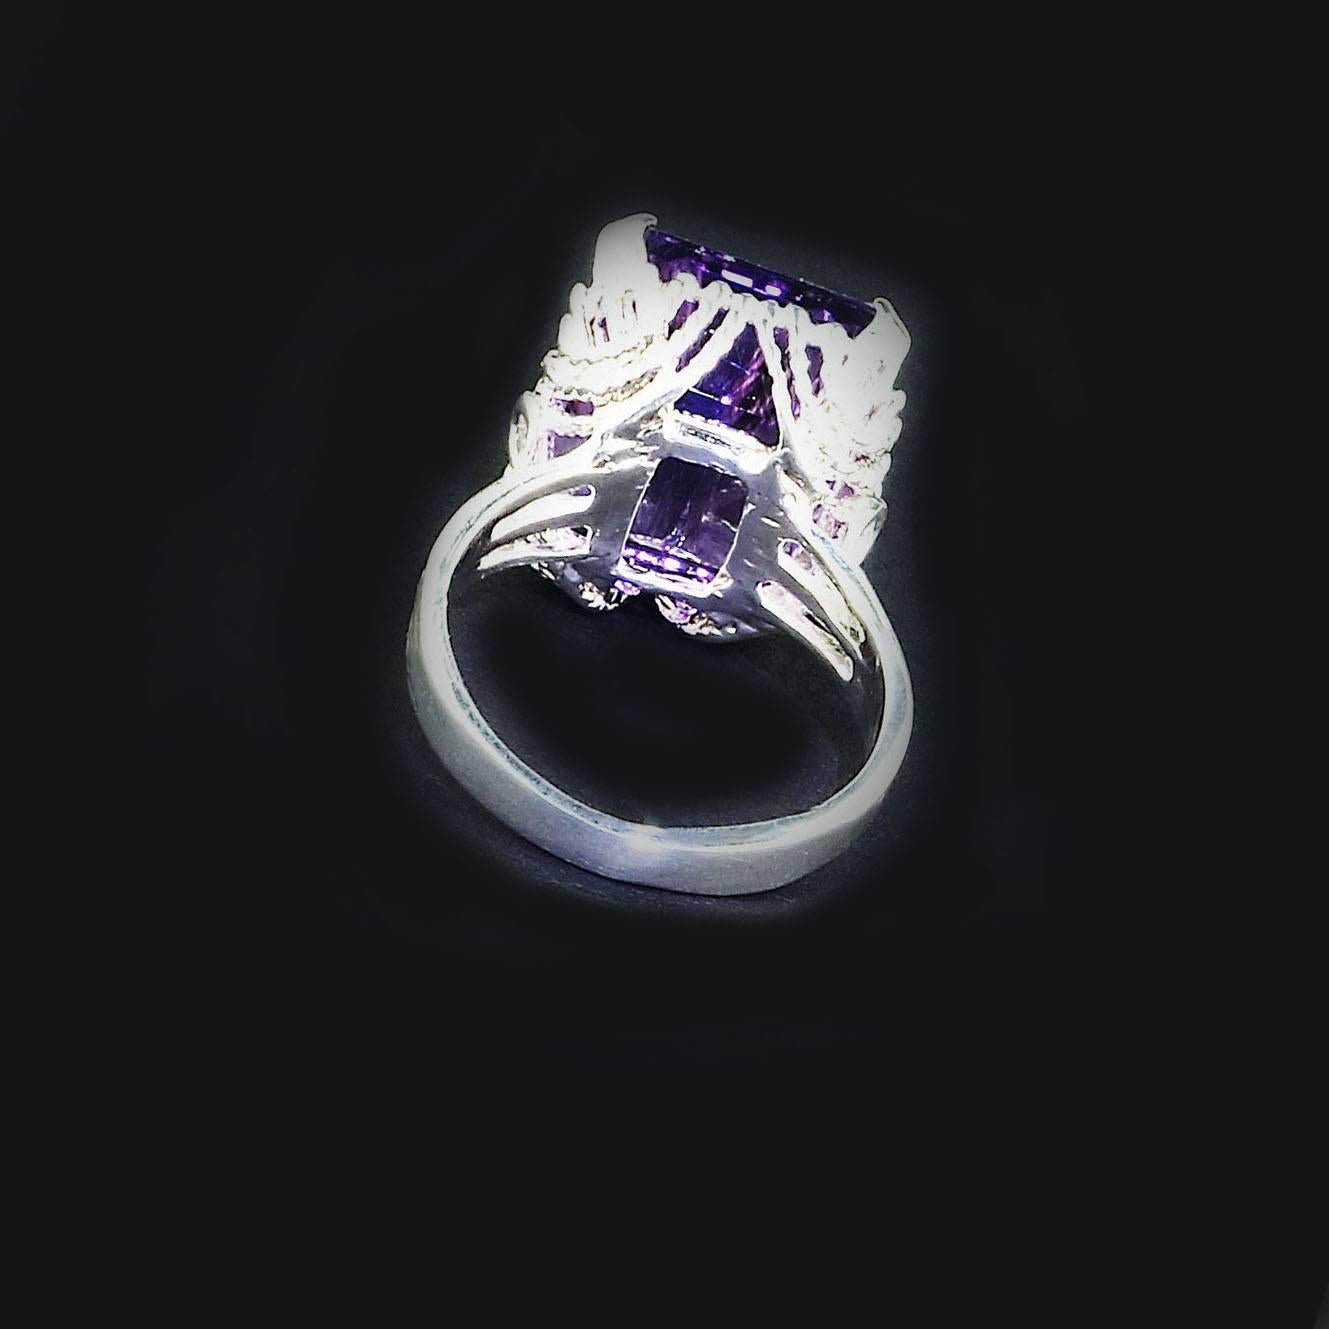 Custom made, bright and sparkling, medium tone Brazilian Amethyst ﻿in a delightful setting of a twisted rope basket in rhodium dipped Sterling Silver ring.  The 14.46 carat emerald cut Brazilian Amethyst comes straight from our favorite supplier in